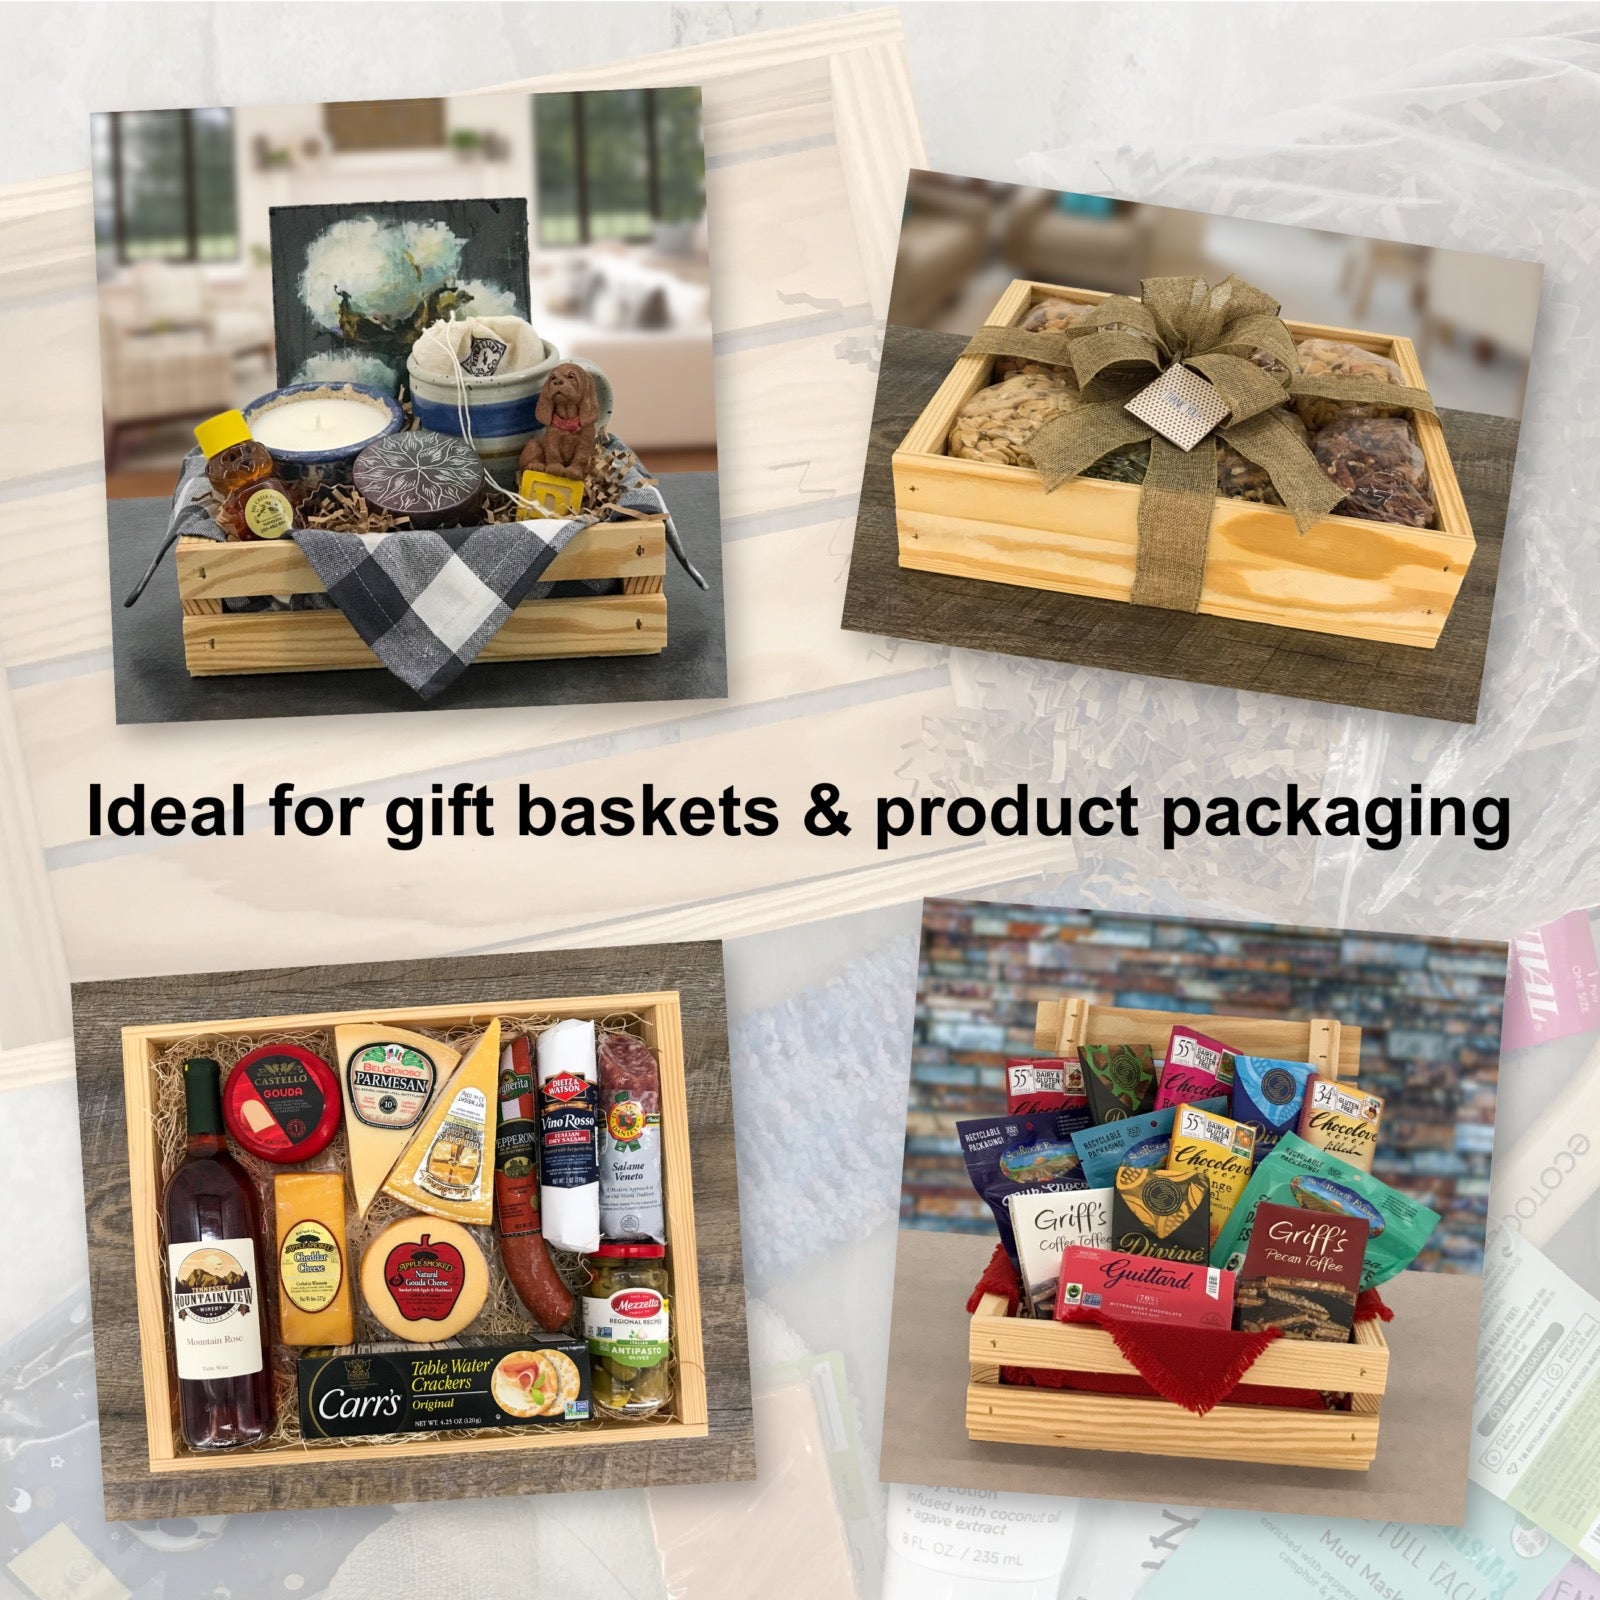 Crates by Carpenter Core are ideal for gift baskets and product packaging